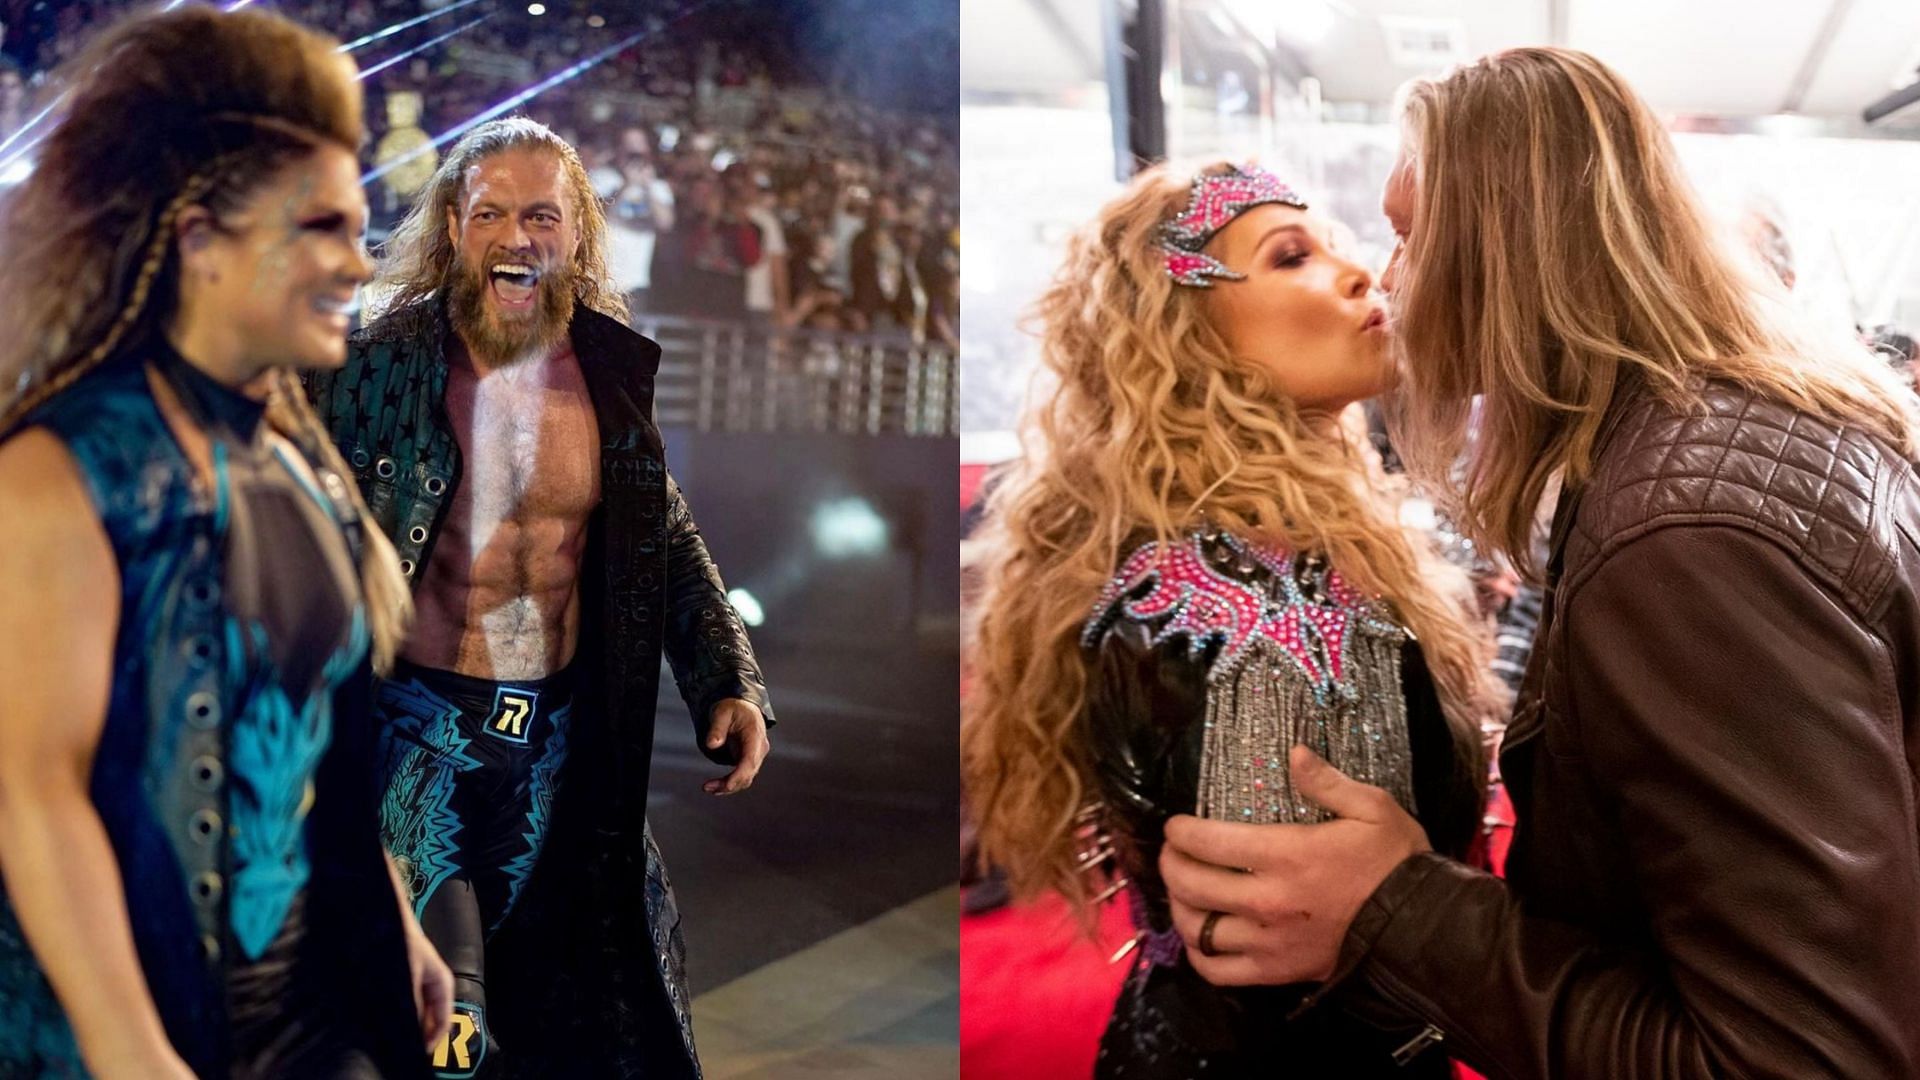 Edge and Beth Phoenix tied the knot in 2016